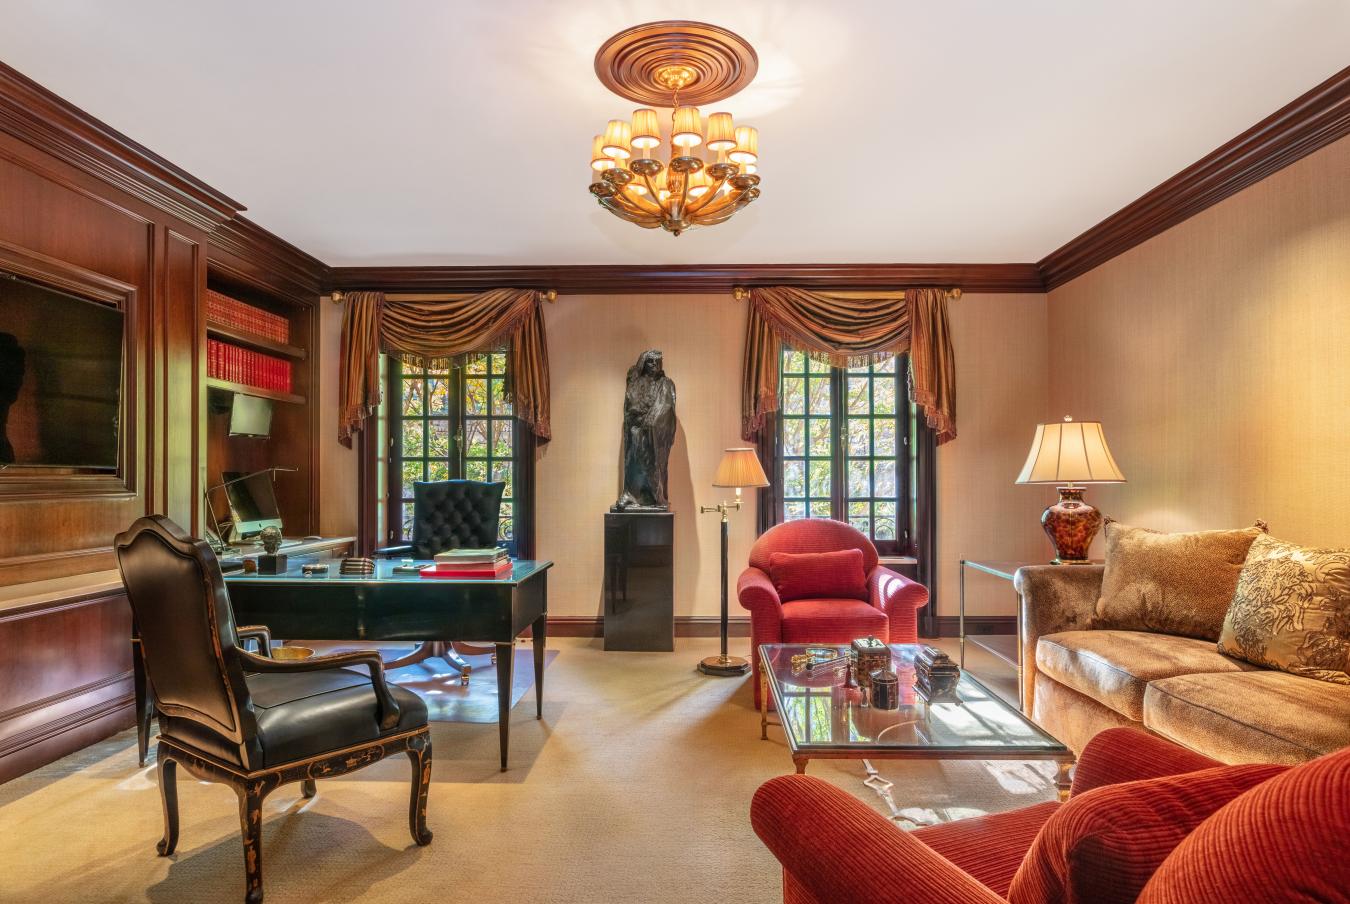 11 EAST 74TH STREET, New York, New York, 10021, United States, 6 Bedrooms Bedrooms, ,9 BathroomsBathrooms,Residential,For Sale,11 EAST 74TH STREET,1454951